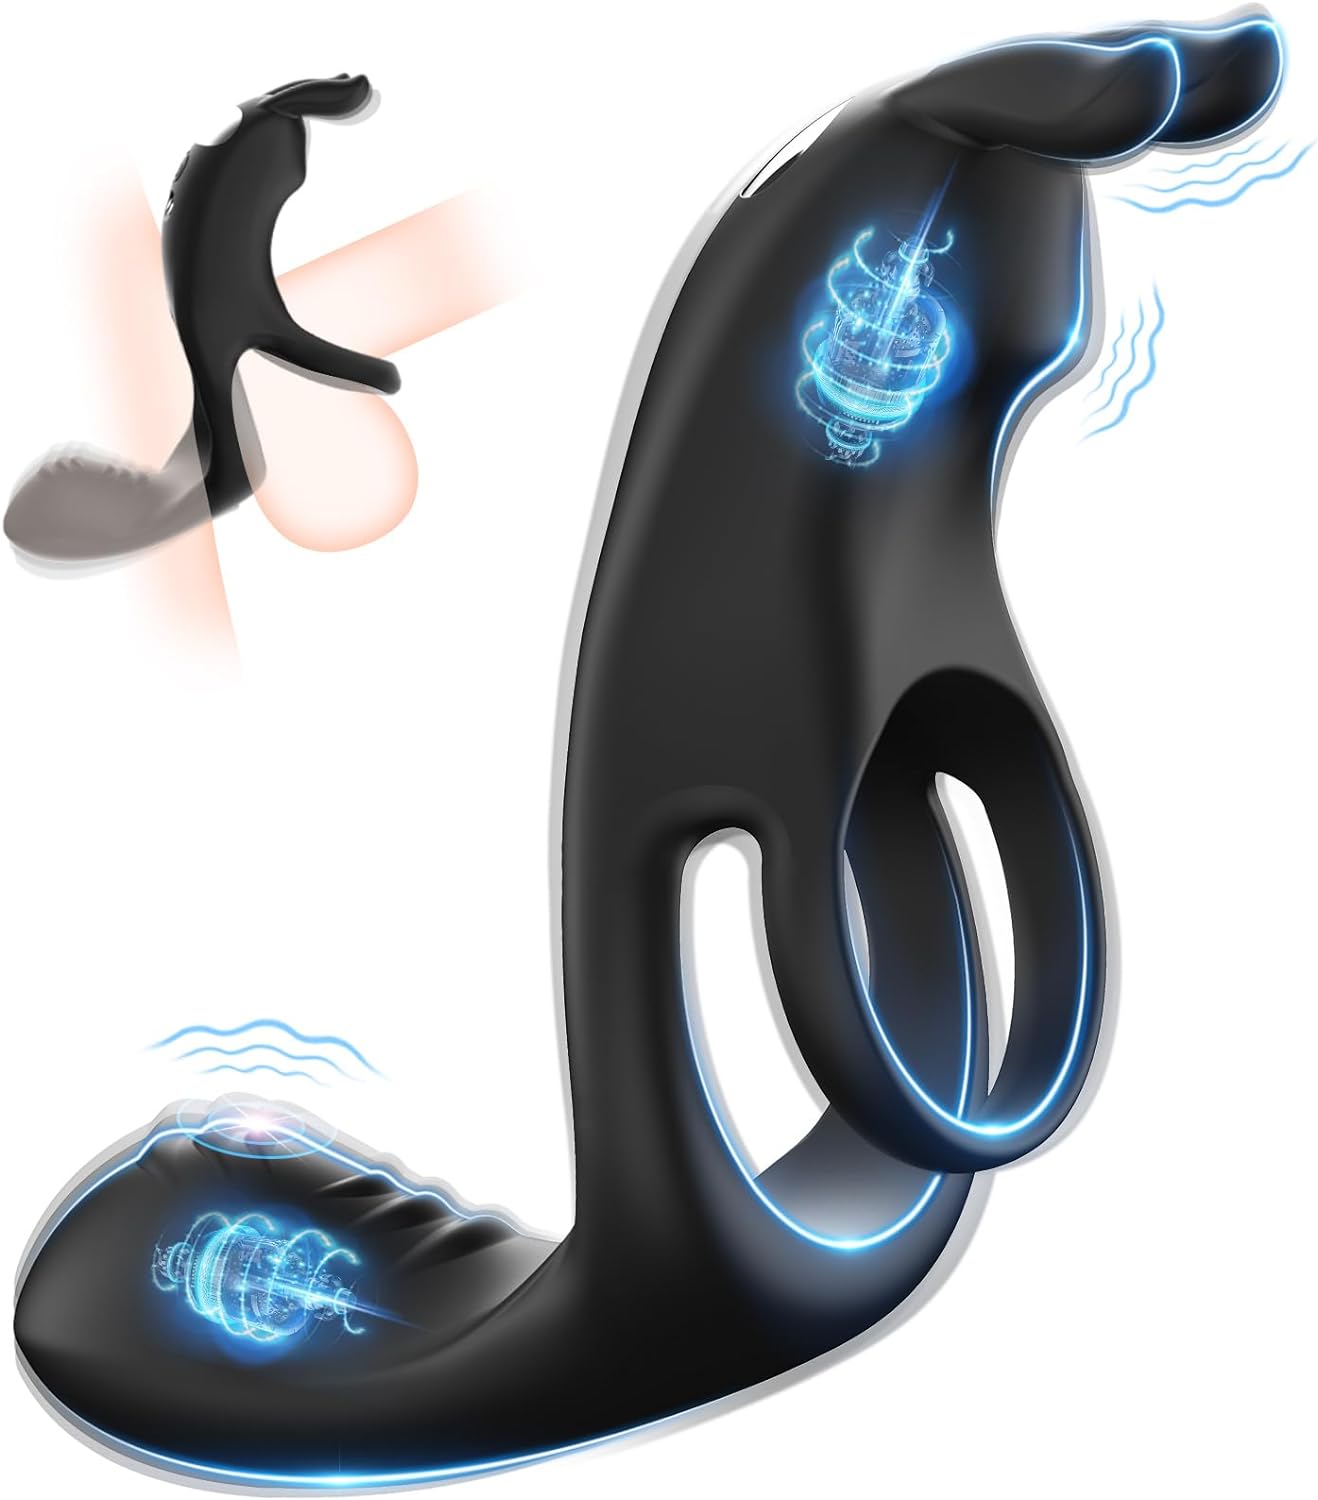 Vibrating Cock Ring Sex Toys - 3 in 1 Penis Ring Couple Vibrator Clitoris & Perineum Stimulator with Rabbit Ears & 10 Vibration Modes, Adult Sex Toys & Games Massager for Men Erection Training